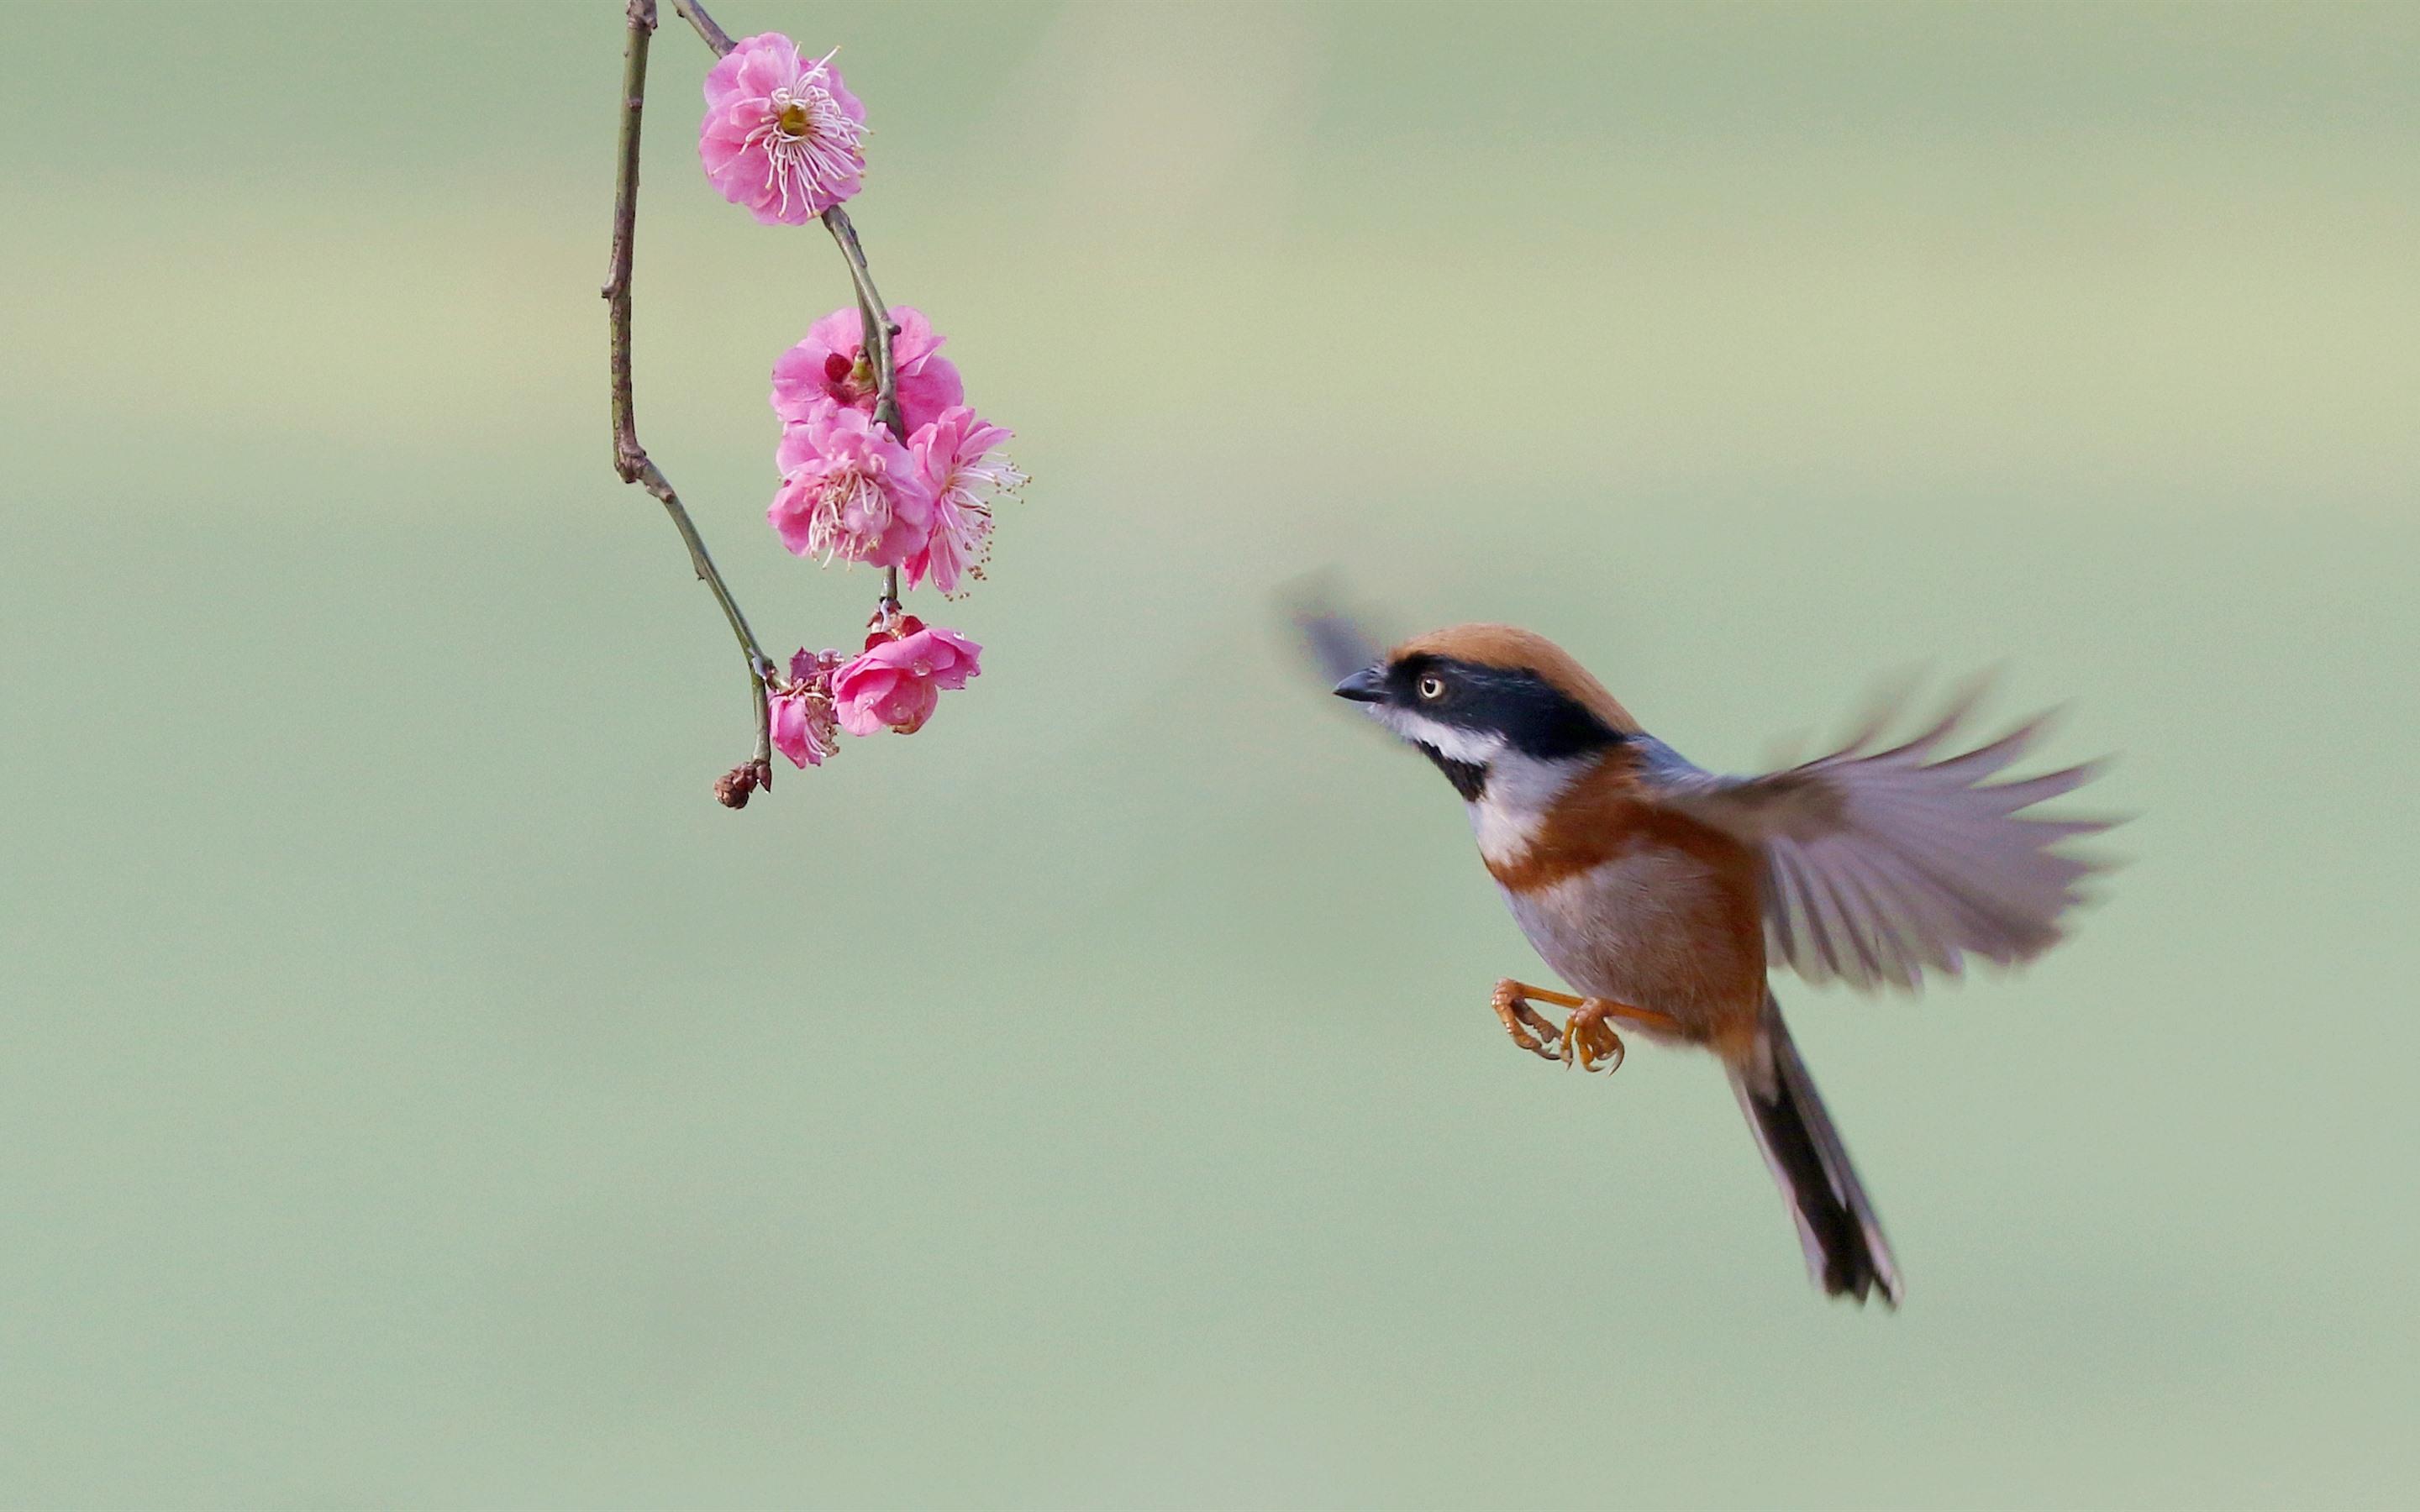 Wallpaper Flying Bird And Pink Flowers, Spring - Spring Flying Bird - HD Wallpaper 